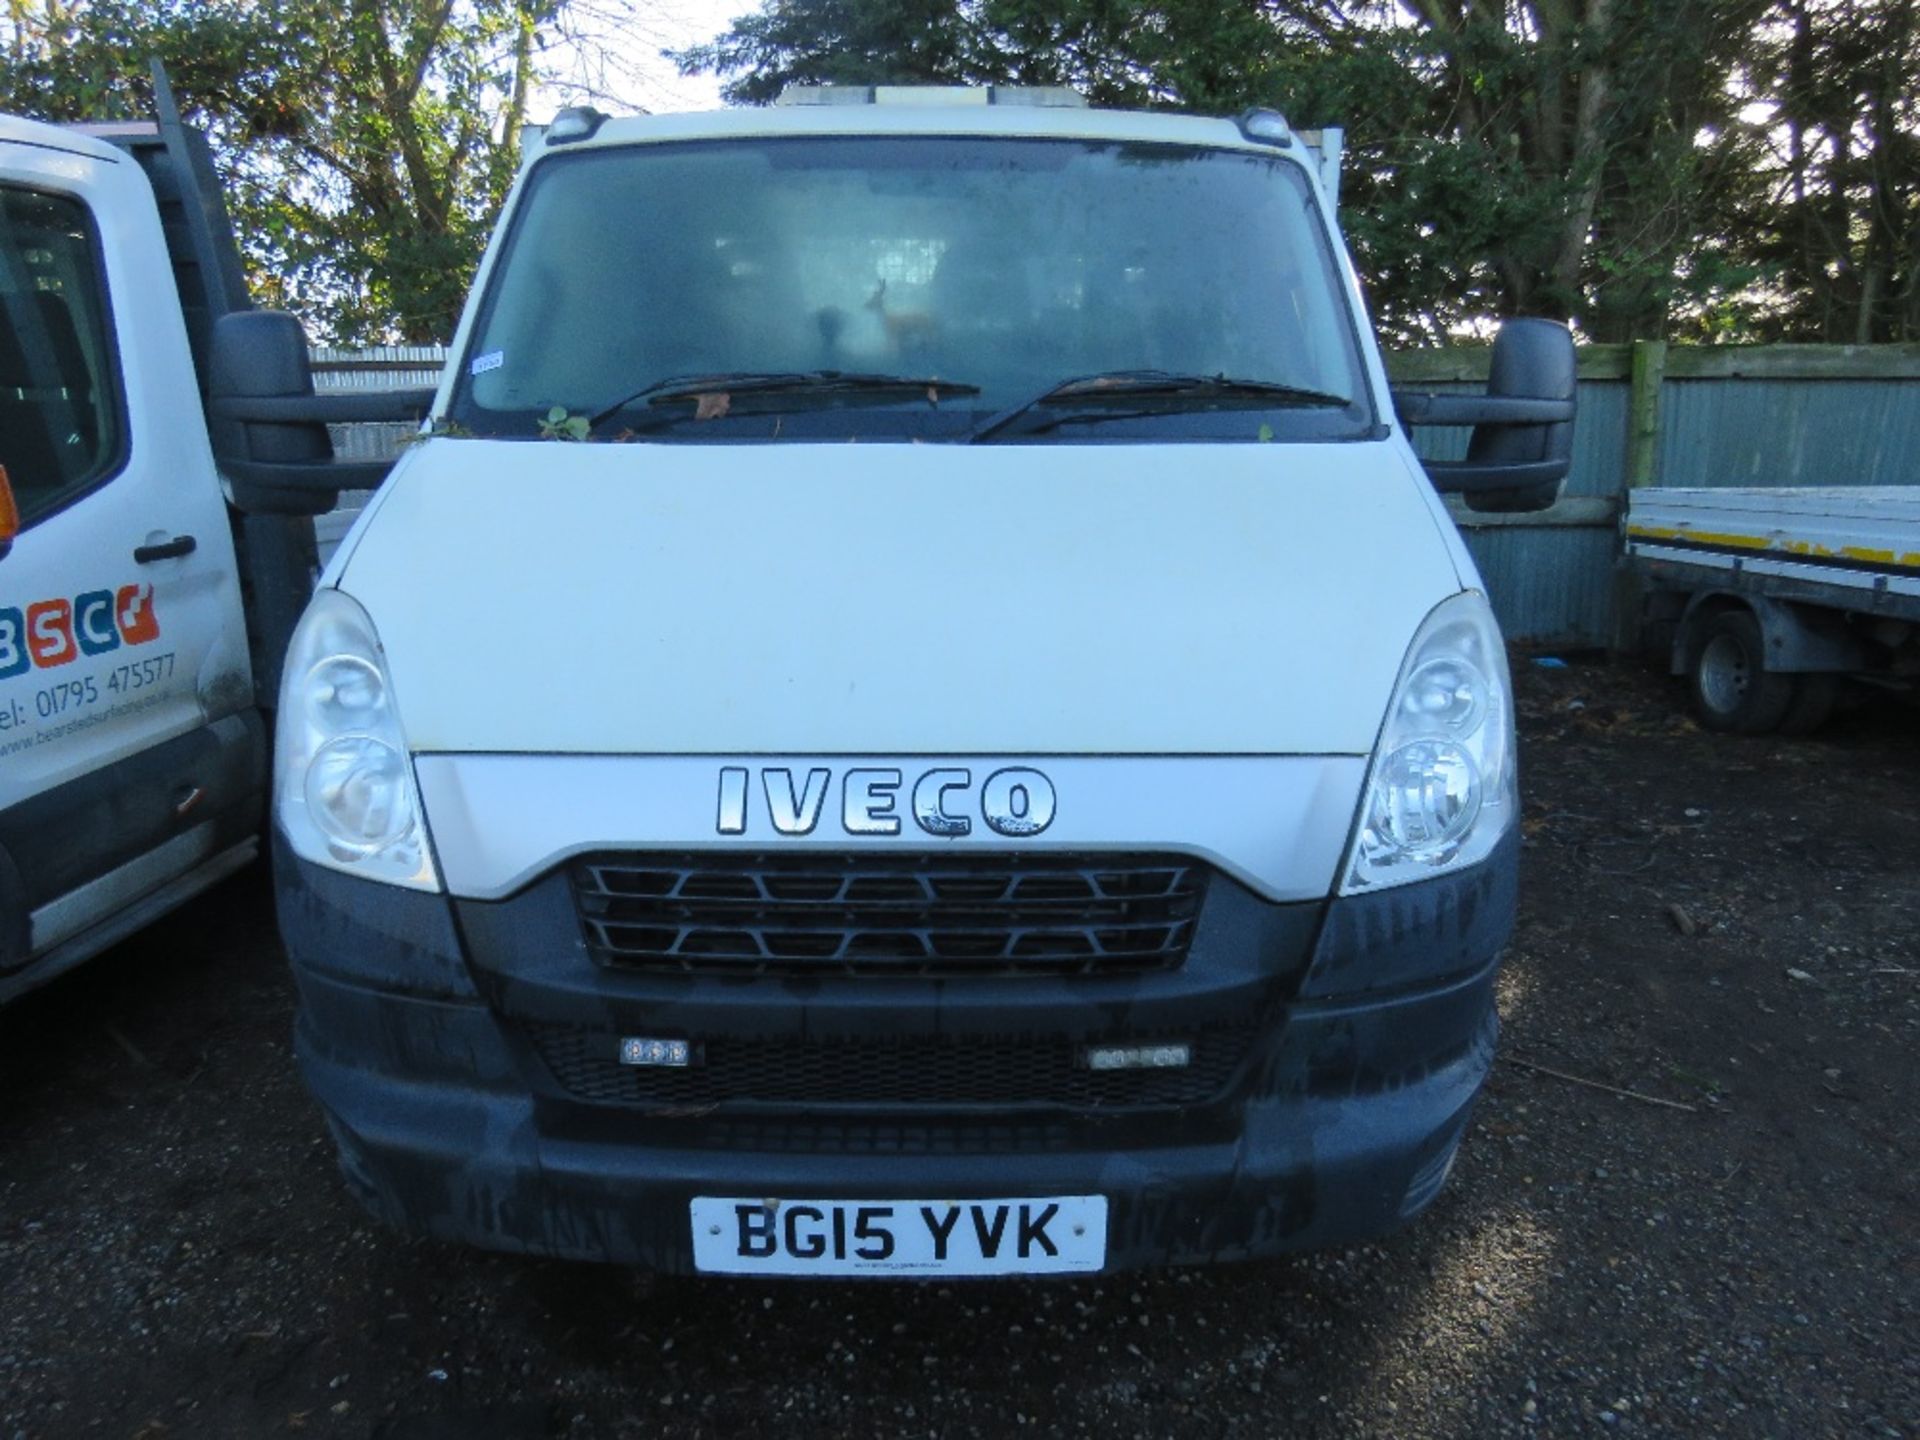 IVECO 70C17 TYPE 7000KG RATED TIPPER TRUCK REG:BG15 YVK WITH V5. 63,954 REC MILES. DIRECT FROM LOCAL - Image 2 of 7